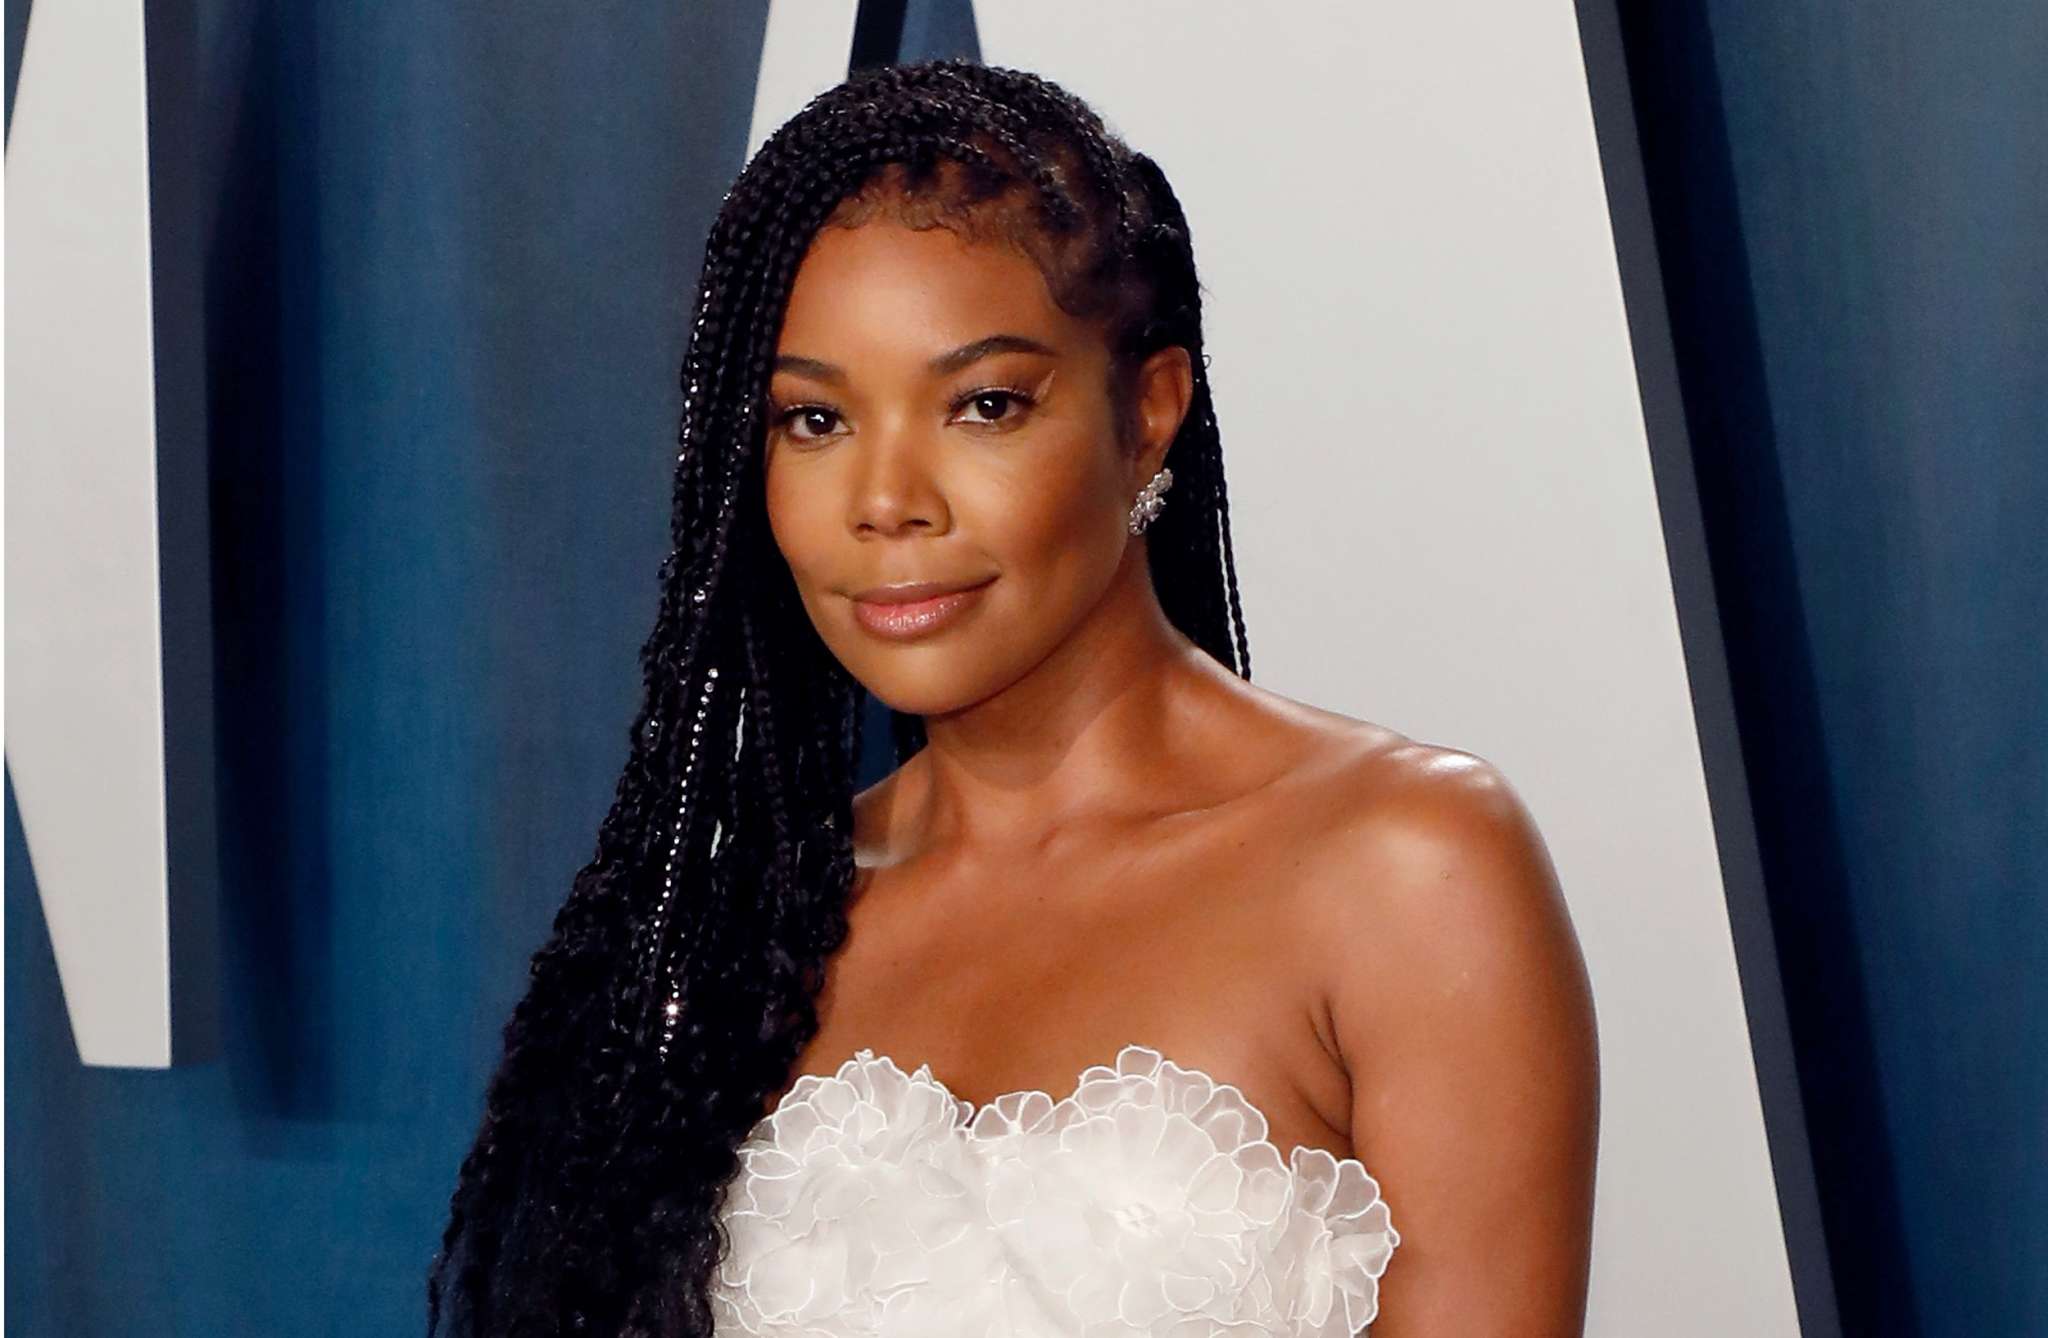 gabrielle-union-is-flaunting-her-beach-body-in-the-latest-pics-and-clips